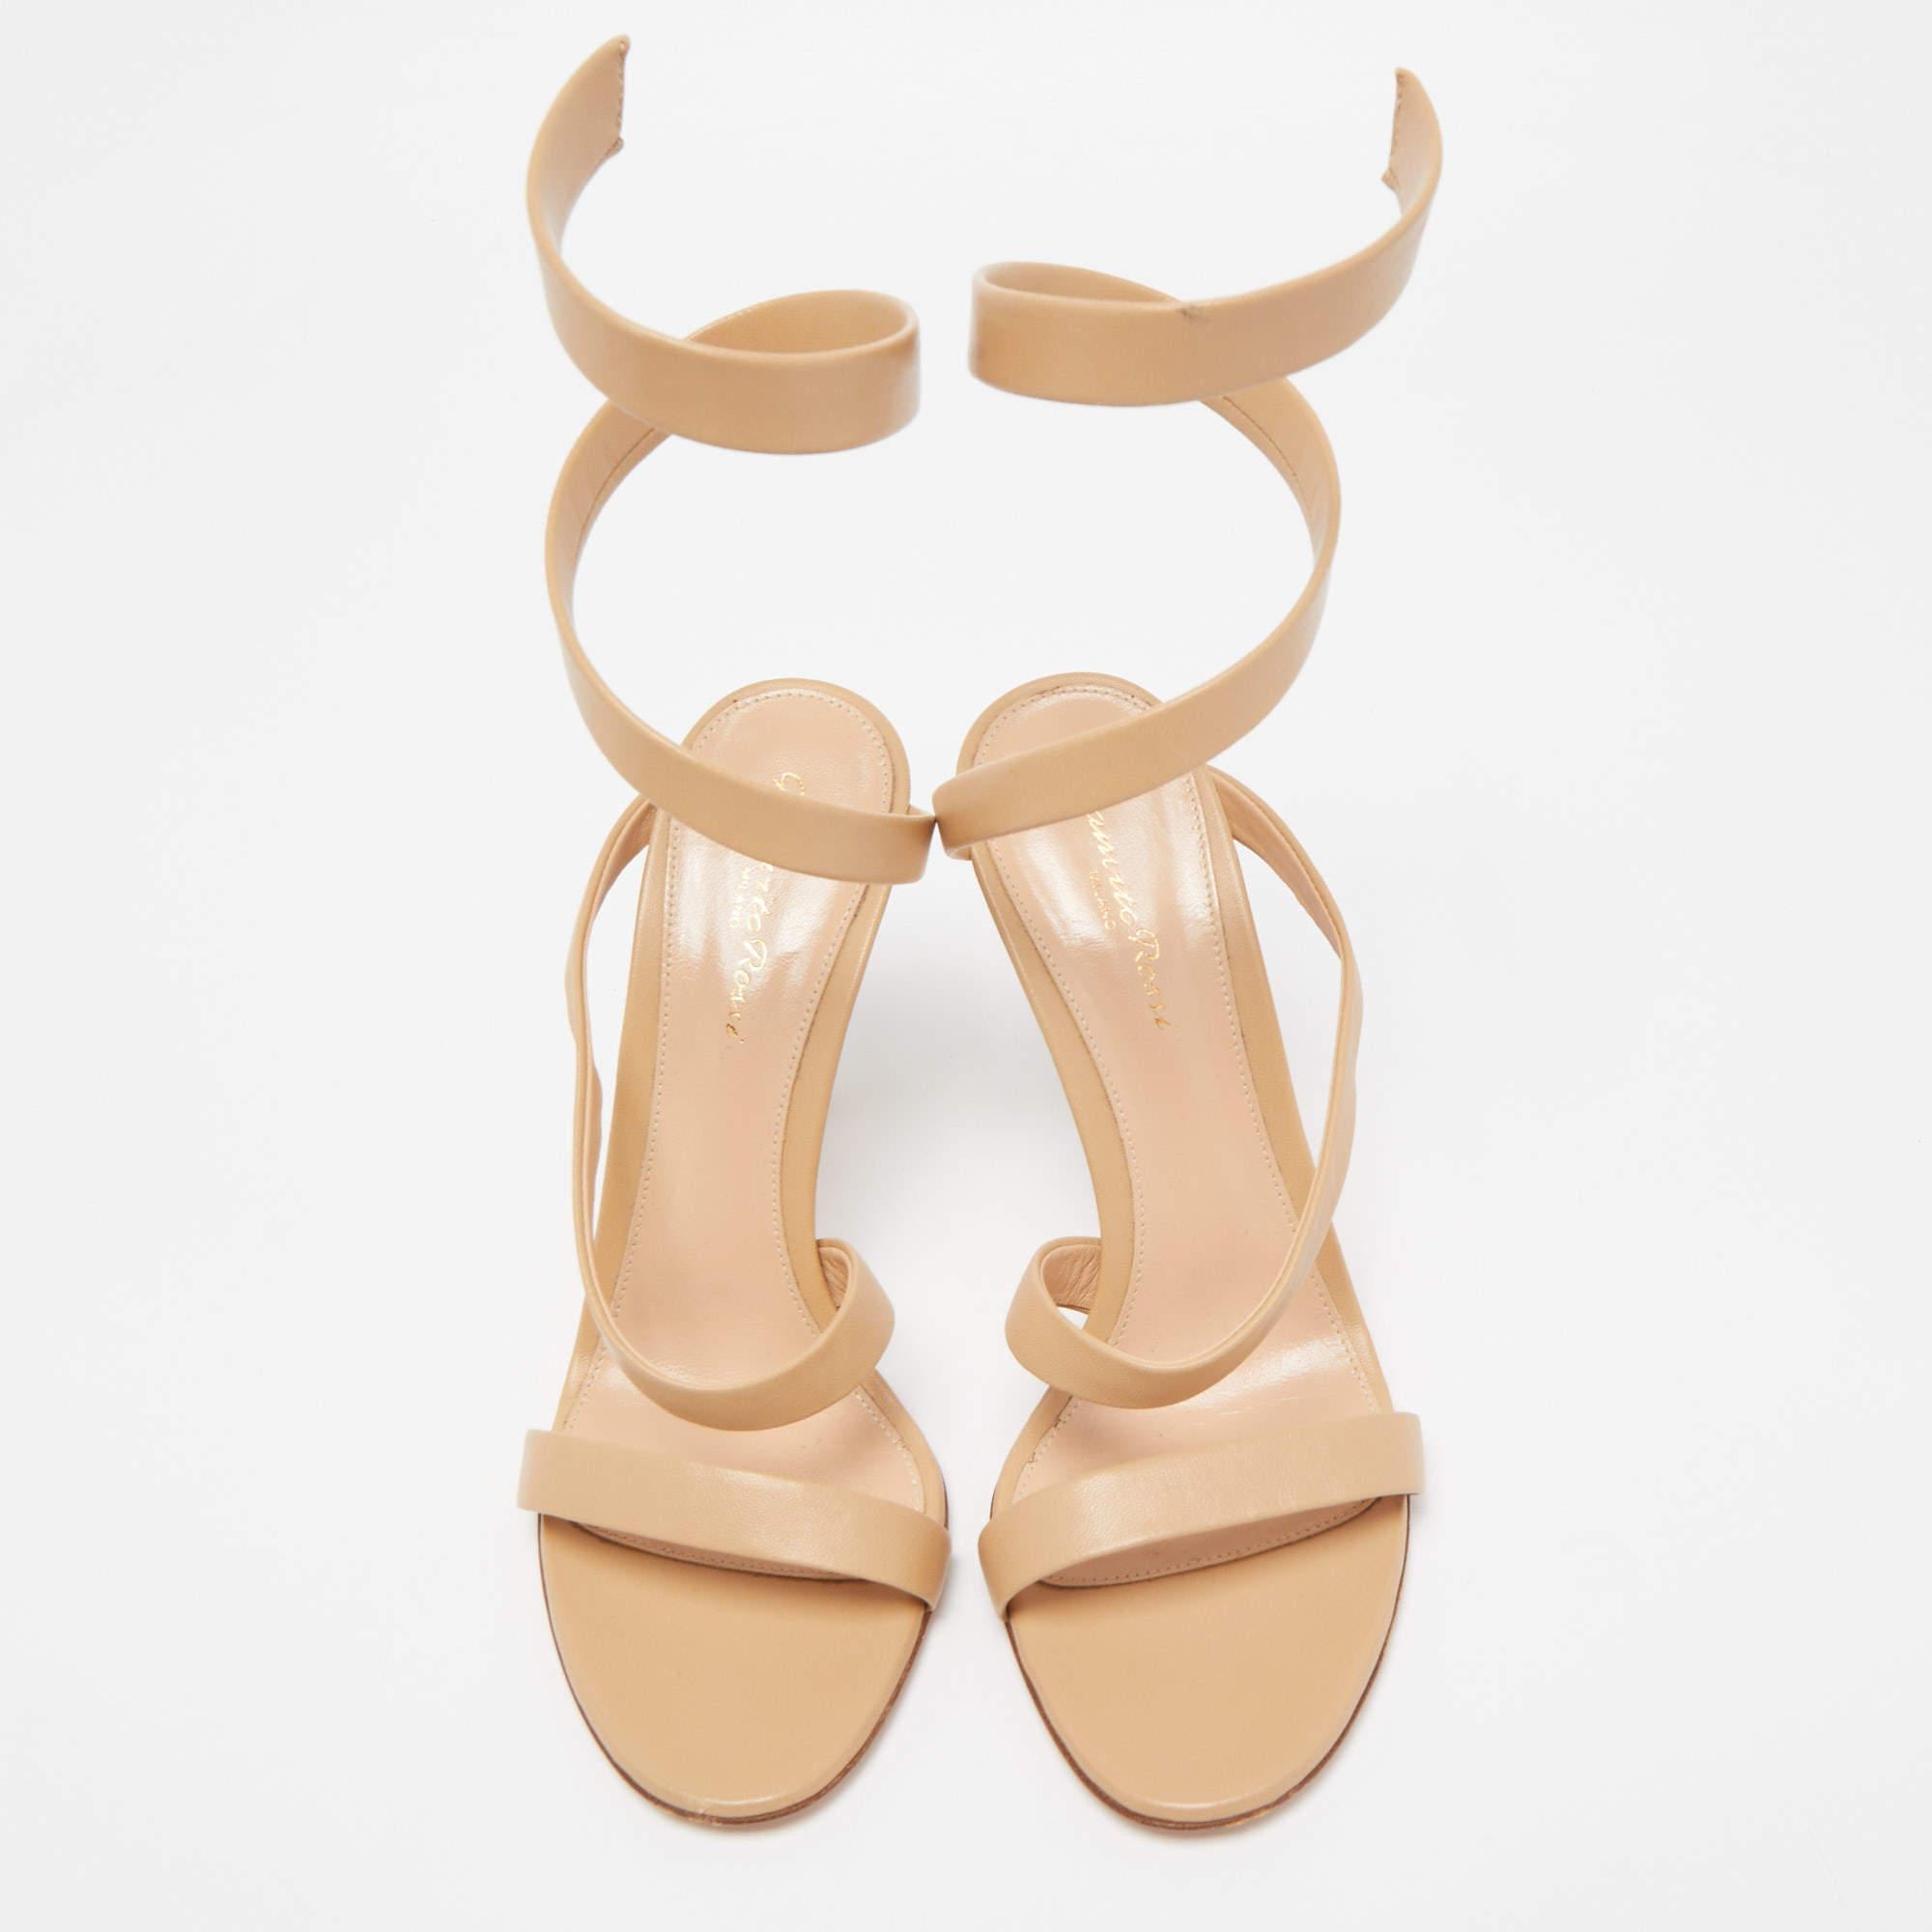 These sandals by Gianvito Rossi embody high-fashion from every angle. They are crafted from satin and are meant to be flaunted. The sandals feature single straps across the toes, wrap-around straps on the ankles, and 10cm heels.

